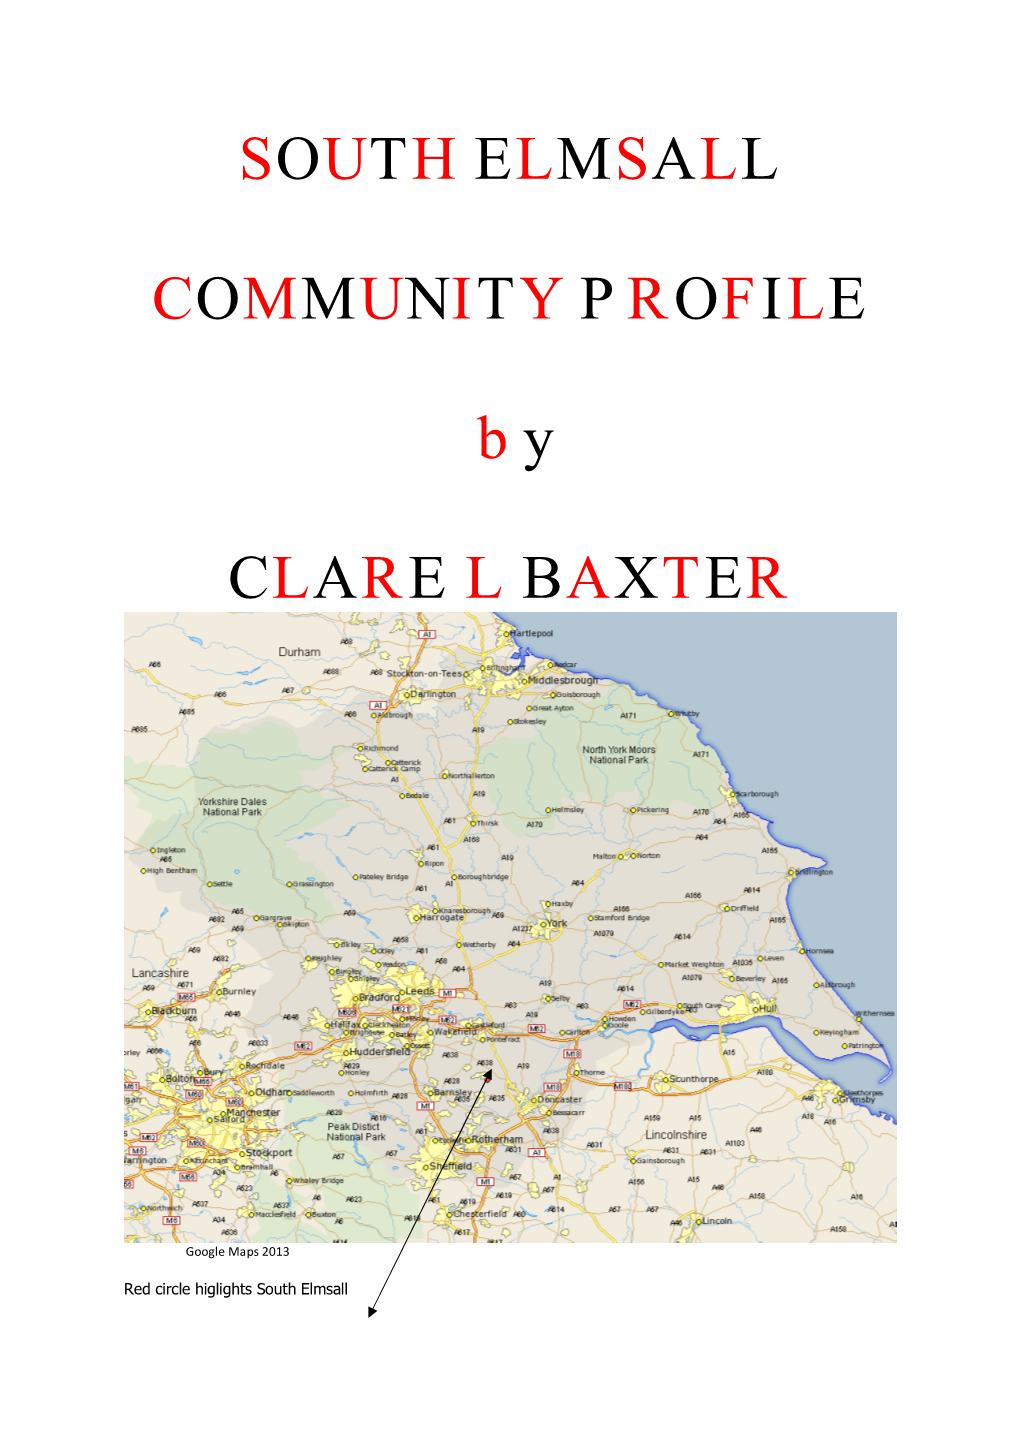 SOUTH ELMSALL COMMUNITY PROFILE by CLARE L BAXTER